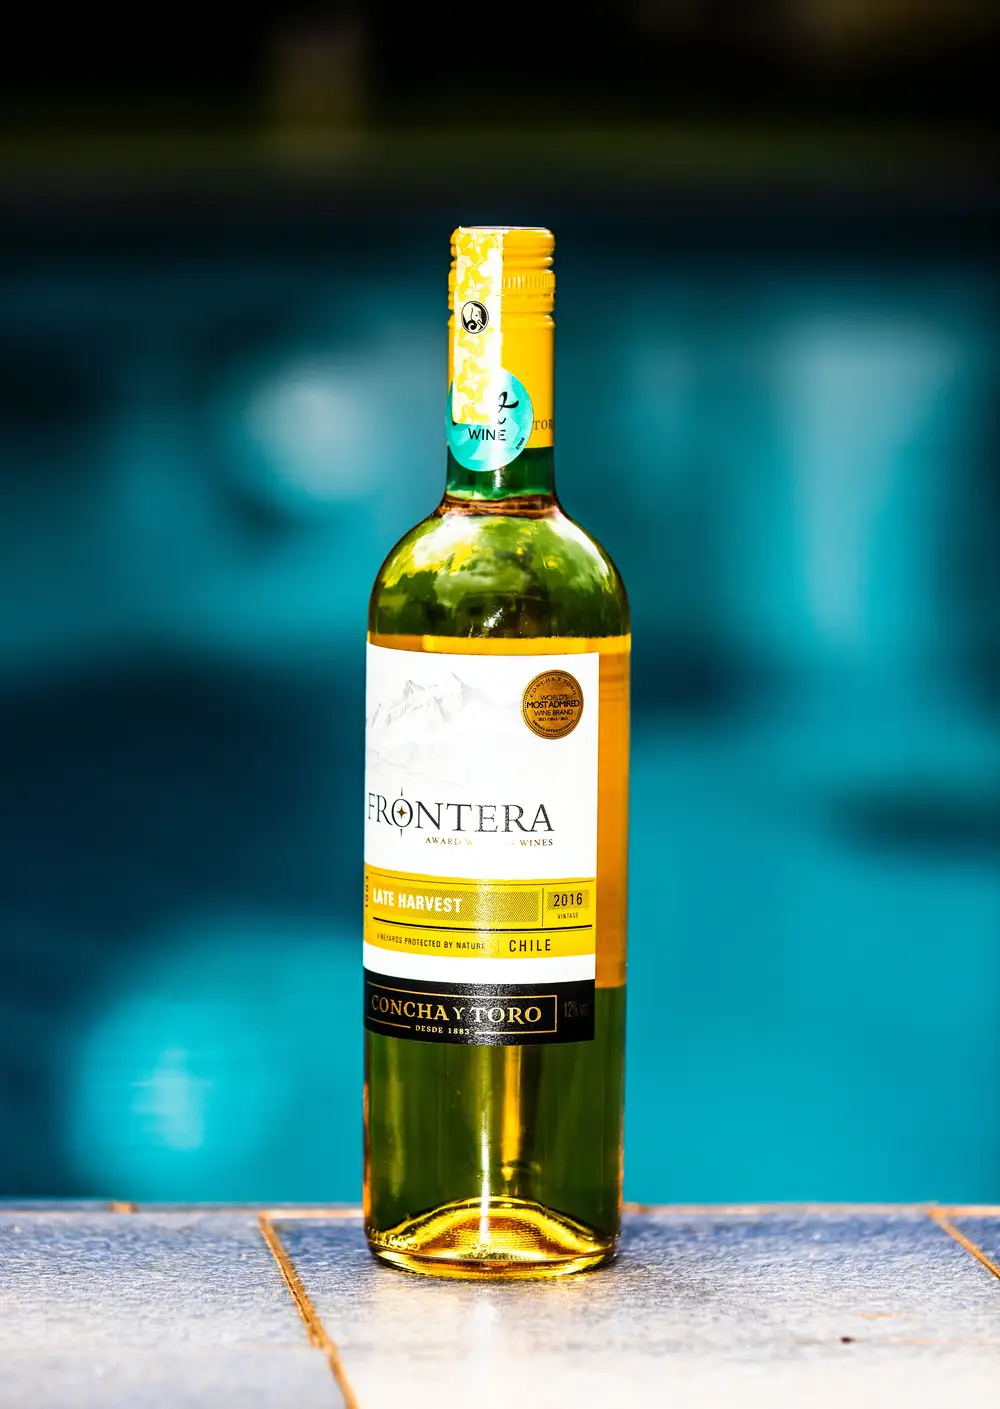 Picture of a bottle of Frontera Wine